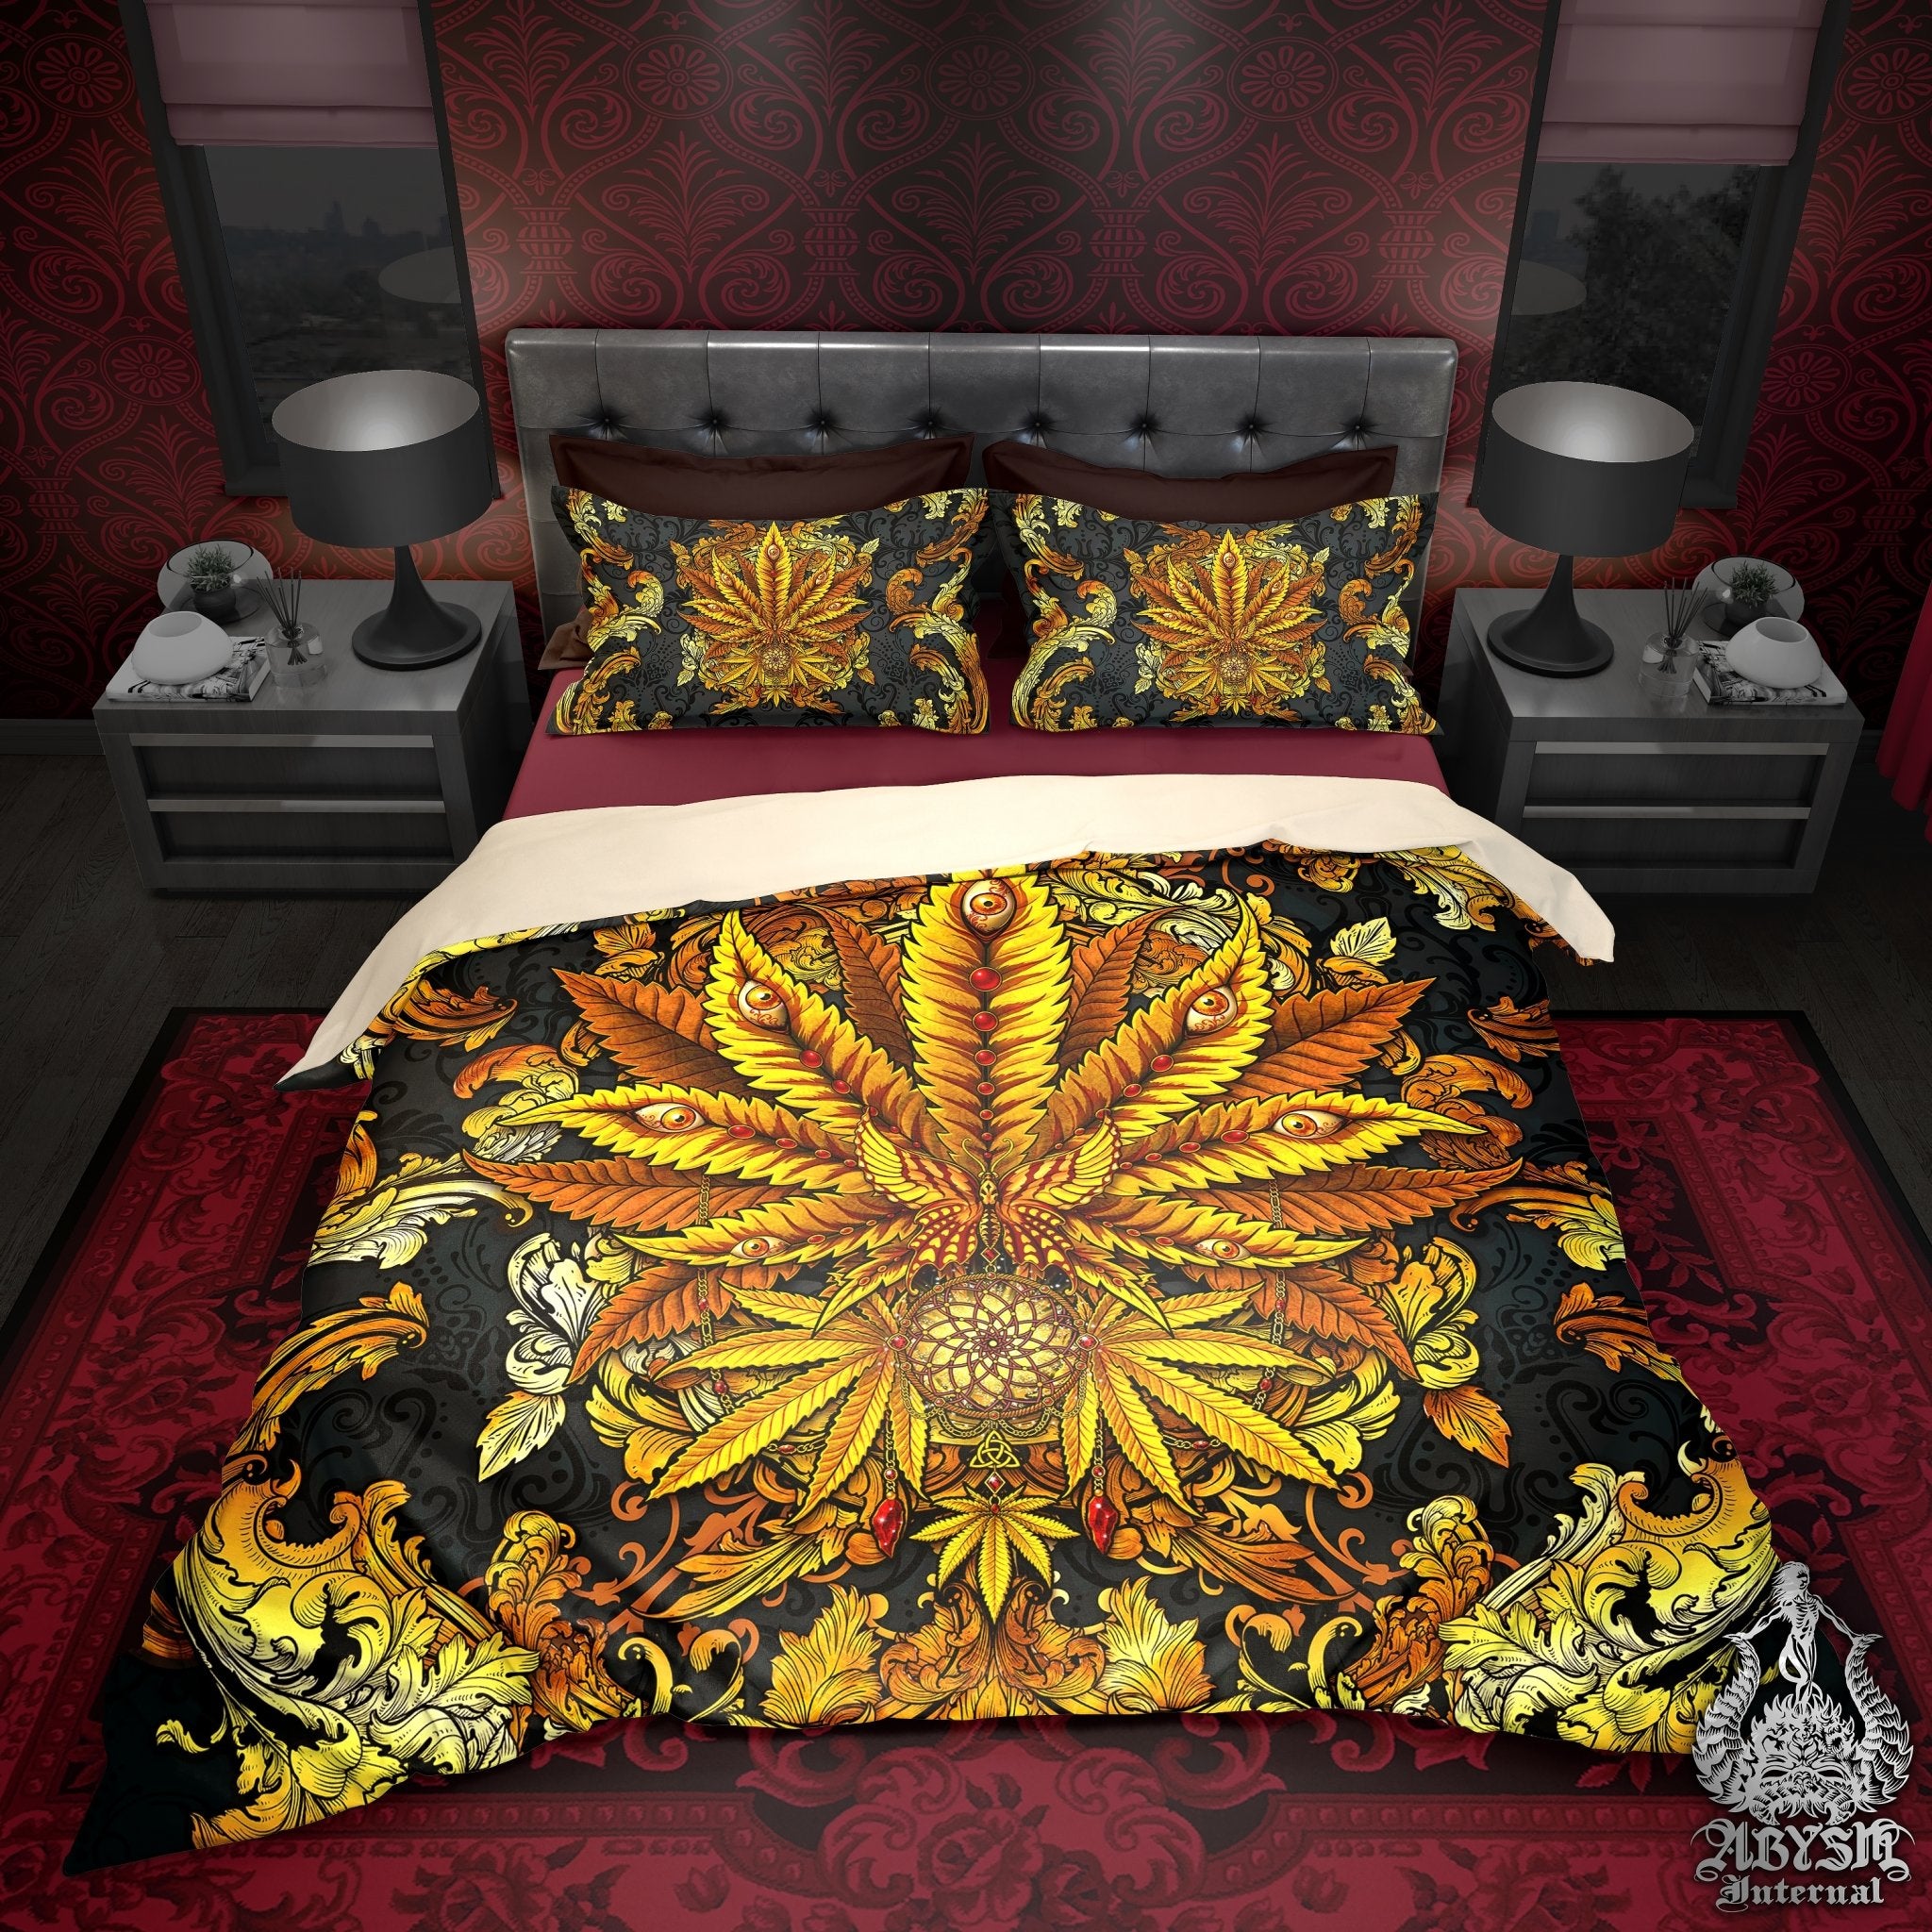 Weed Bedding Set, Comforter and Duvet, Cannabis Bed Cover, Marijuana Bedroom Decor, King, Queen and Twin Size, 420 Room Art - Gold - Abysm Internal